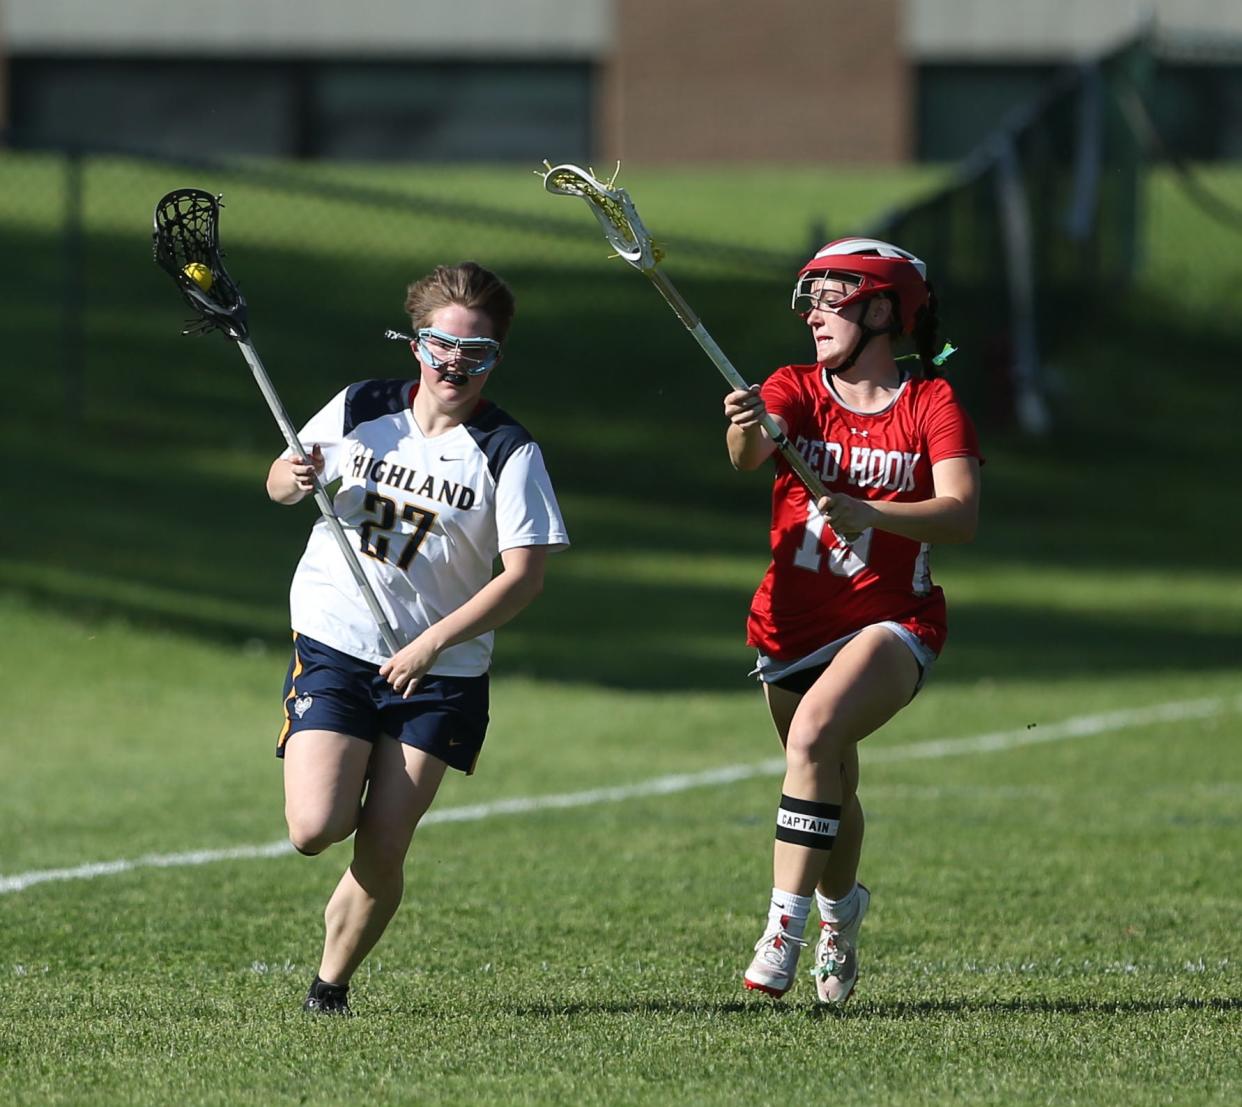 Highland's Sophie Murtaugh carries the ball up field while guarded by Red Hook's Yianna Giannoulis during a May 8, 2024 girls lacrosse game.